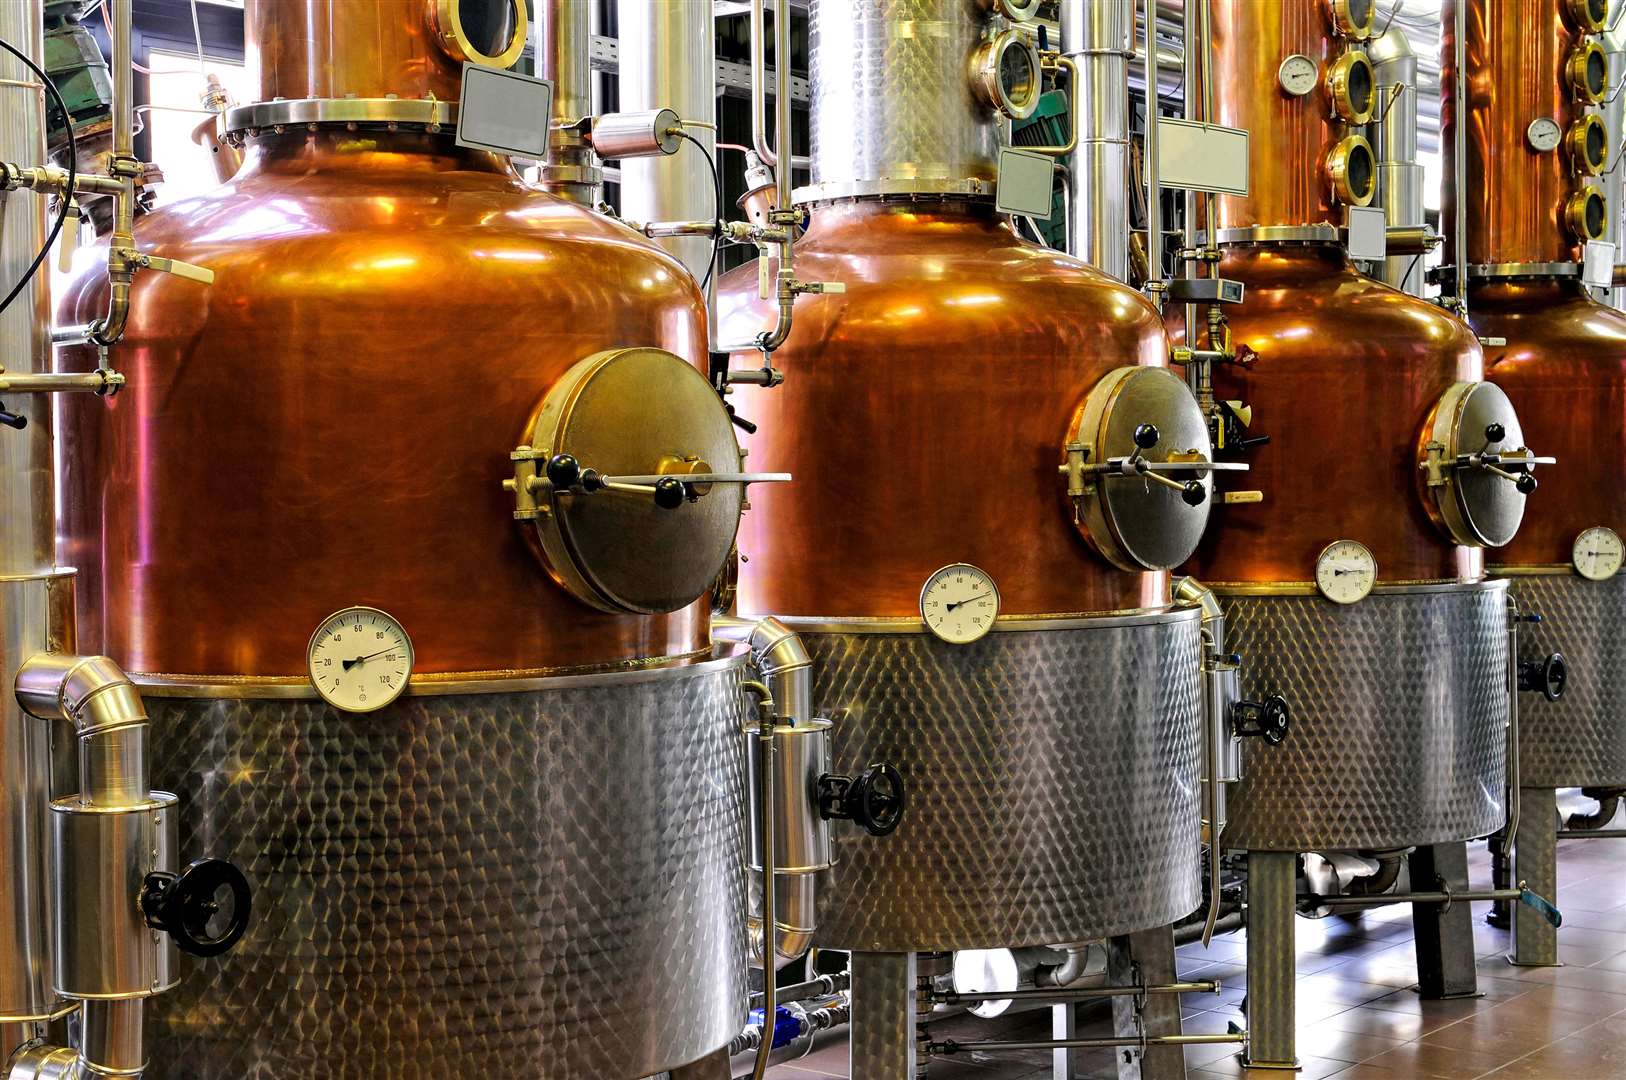 Water is a vital ingredient in the process of distilling Scotch whisky.